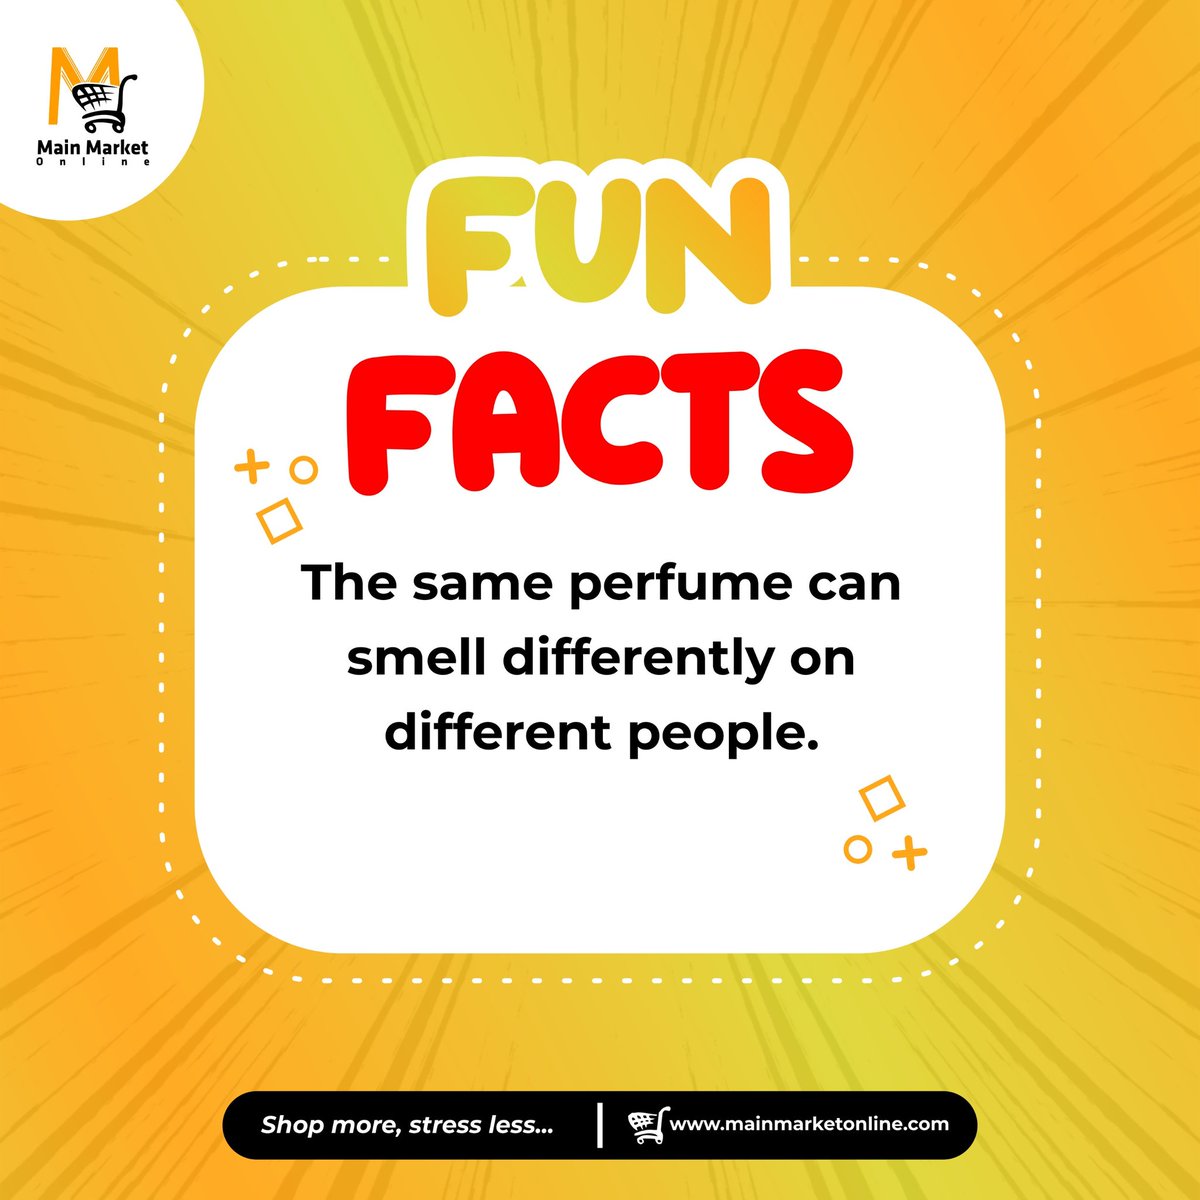 Did you know the same perfume can smell different on different people? It's all about our unique body chemistry! So, when shopping for a new scent, give it a test run on your skin to see how it blends with your natural aroma. #FunFact #PerfumeMagic #MMO #MainMarketOnline #tgif